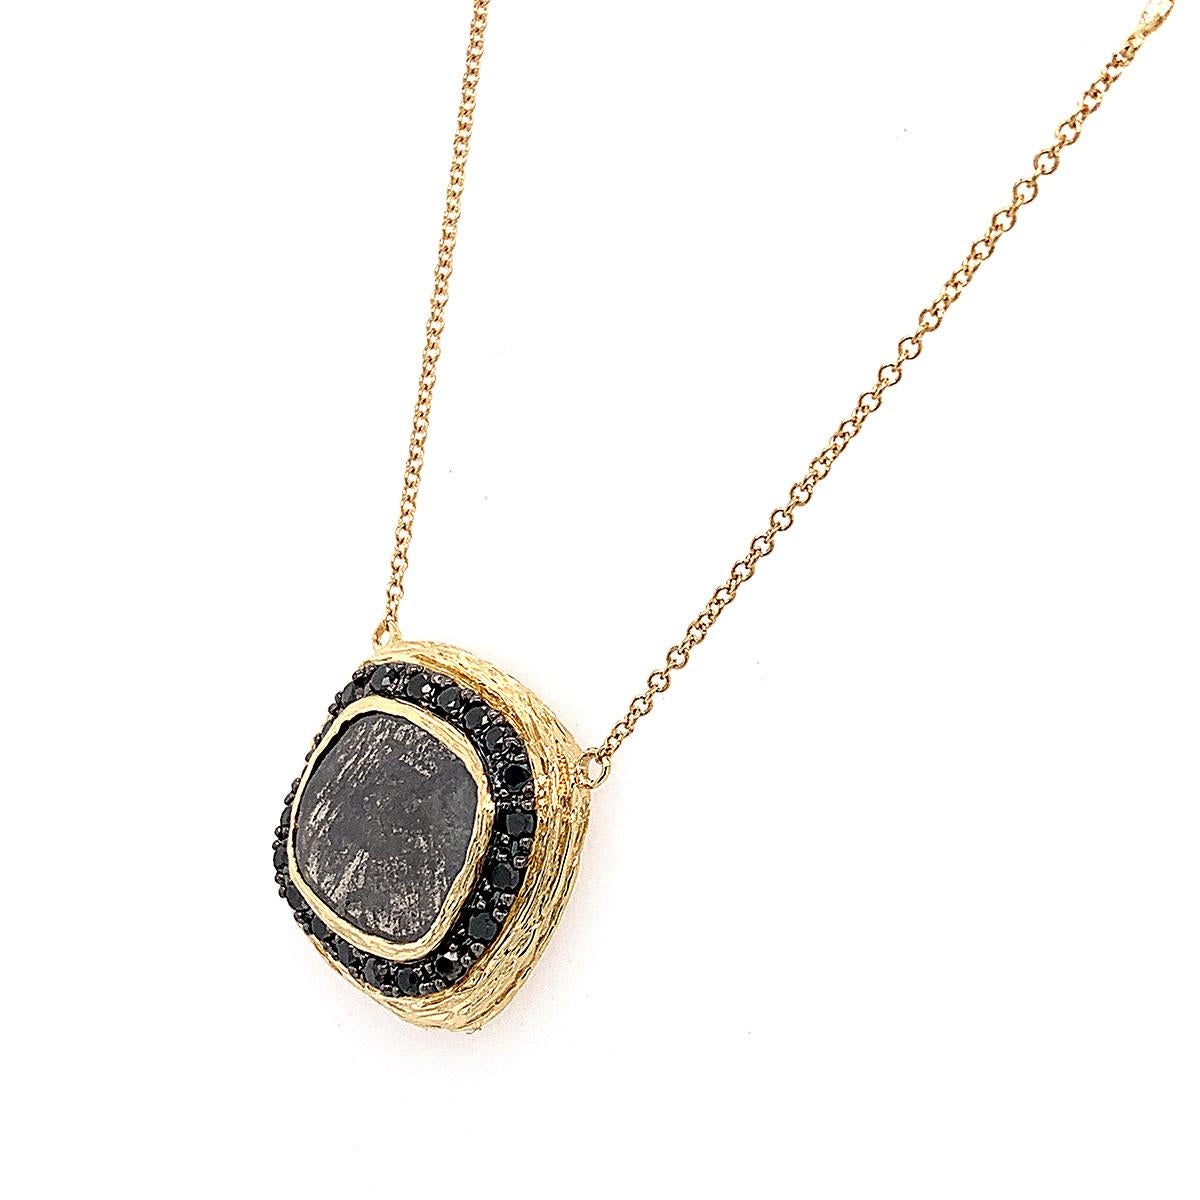 From our exclusive Alpinia collection, we are proud to present this handcrafted One-Of -A-Kind organic design necklace. An exotic combination of a Cushion shape Rosetta Salt & Pepper natural diamond, encircled by a halo of black diamonds. Four (4)